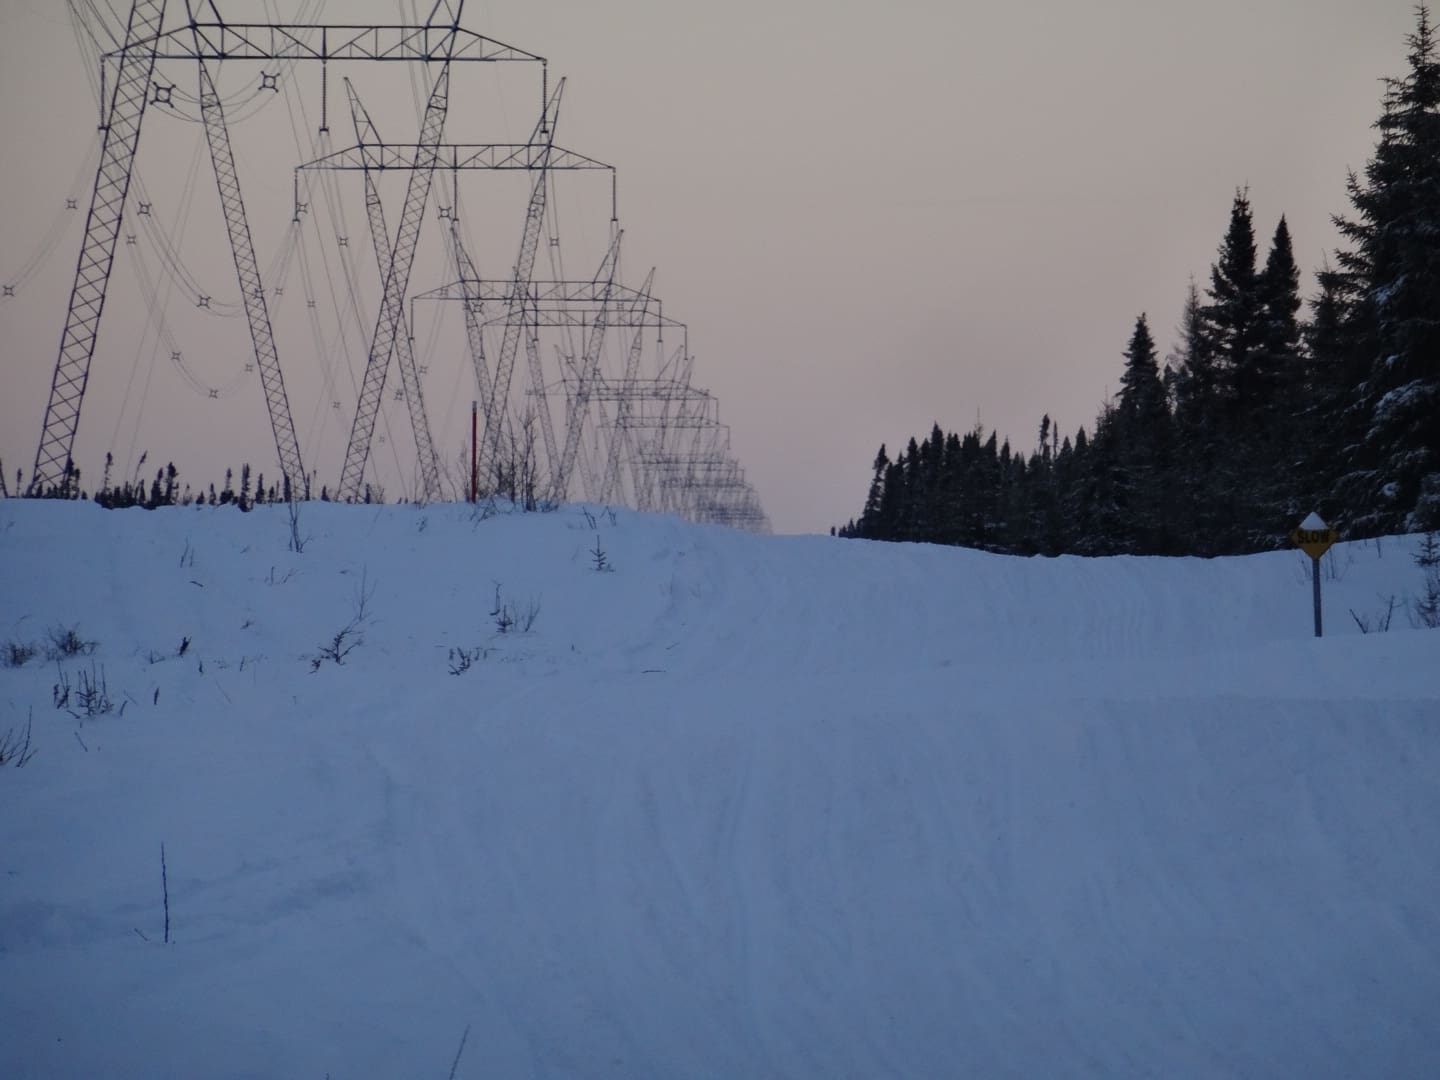 Hydro towers beside a snowmobile trail in the evening light in north eastern Ontario